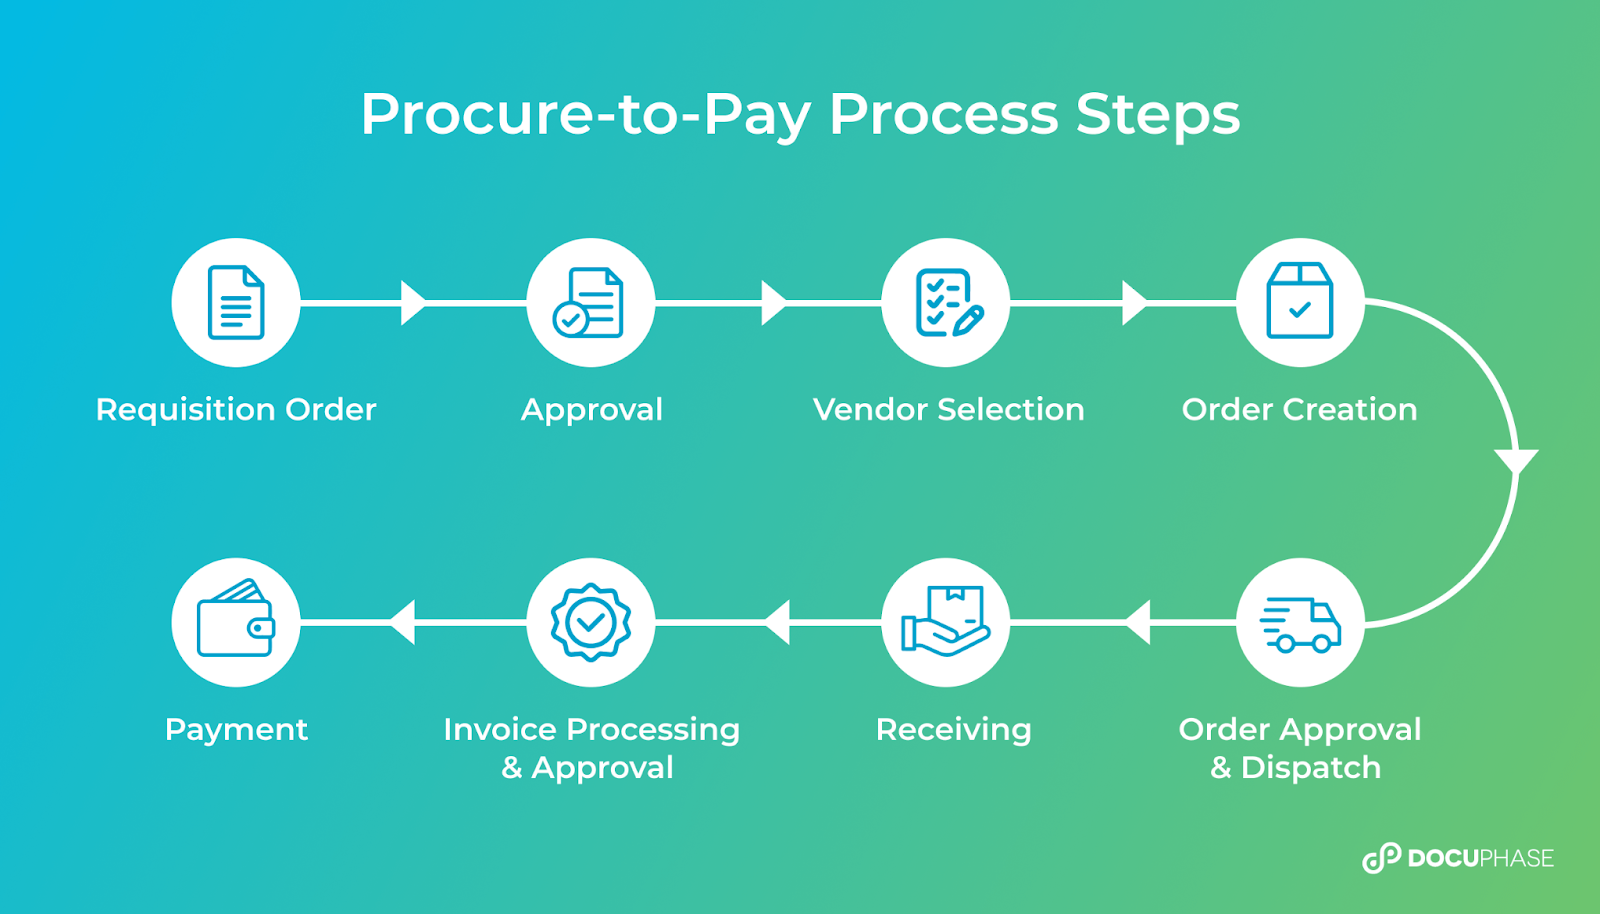 Flowchart of the procure-to-pay process